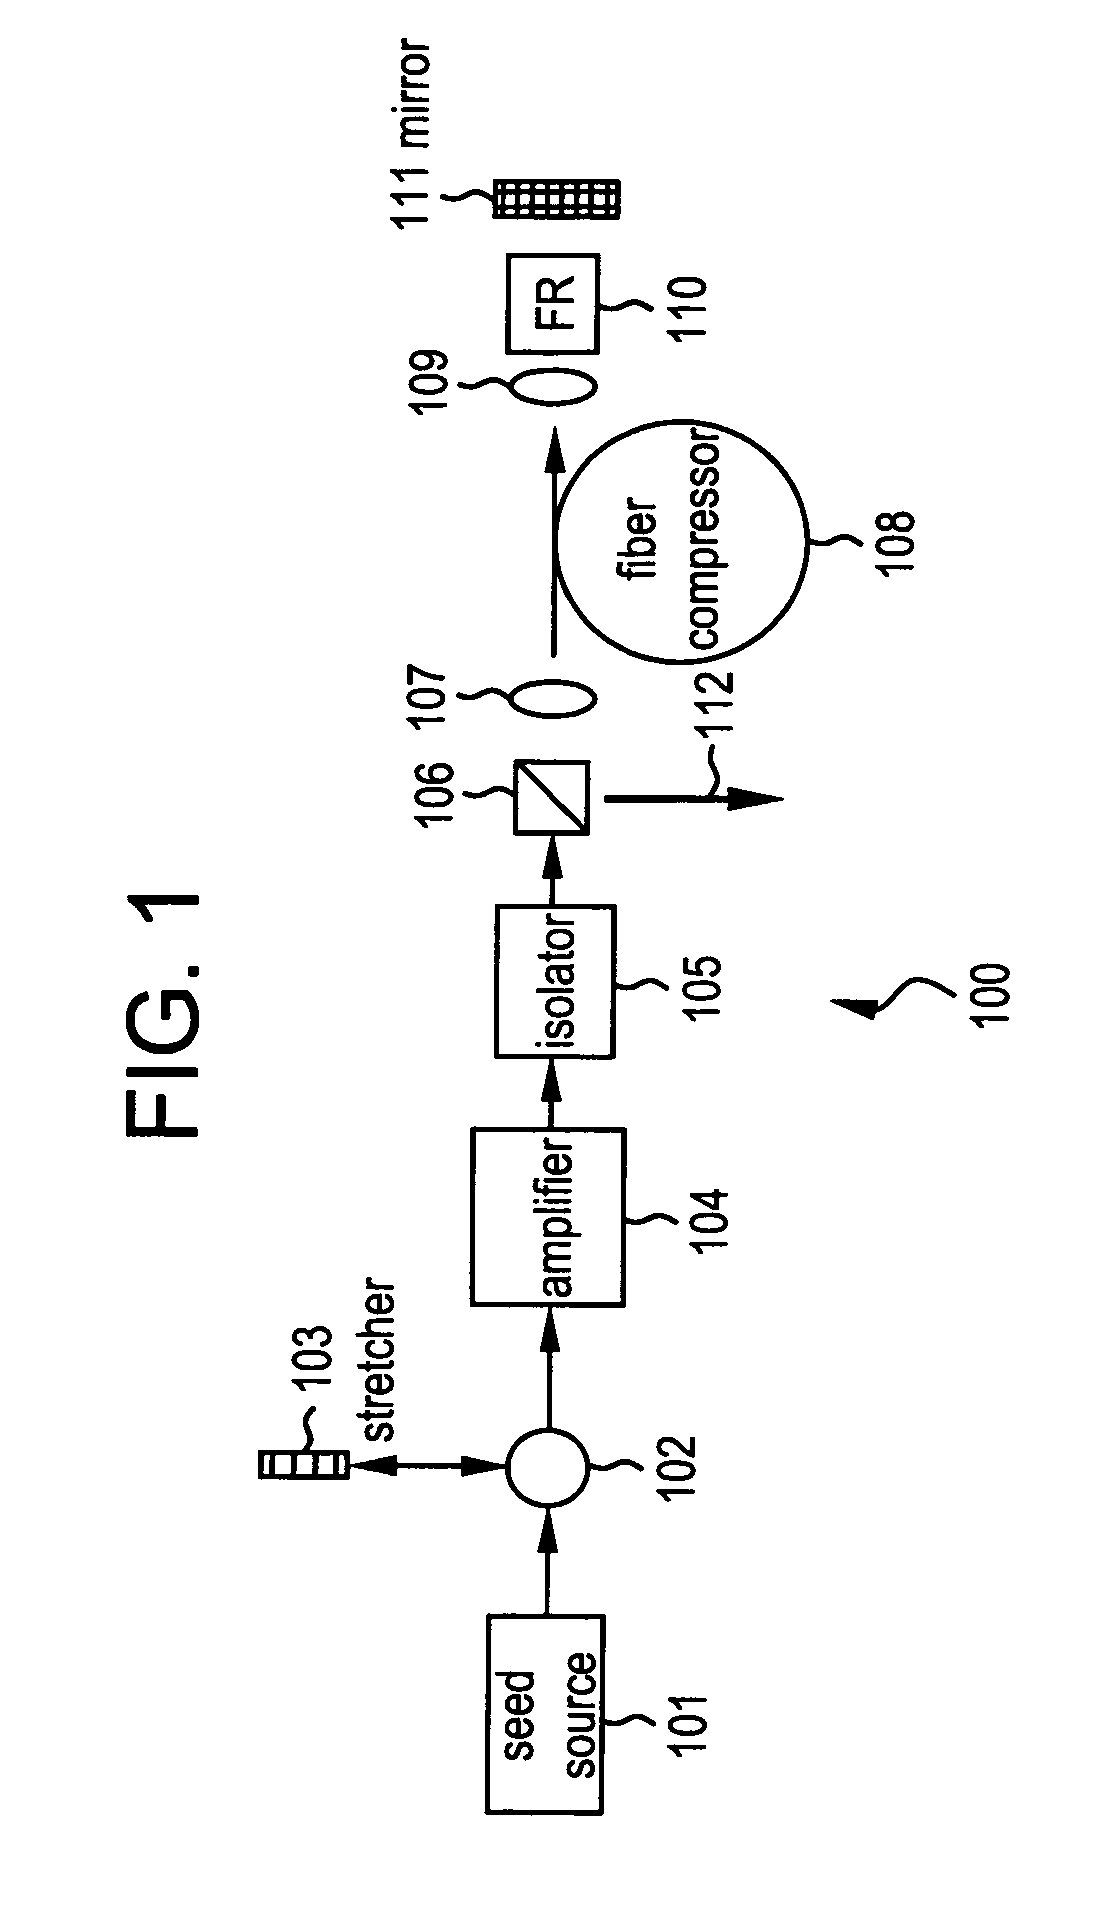 All-fiber chirped pulse amplification systems